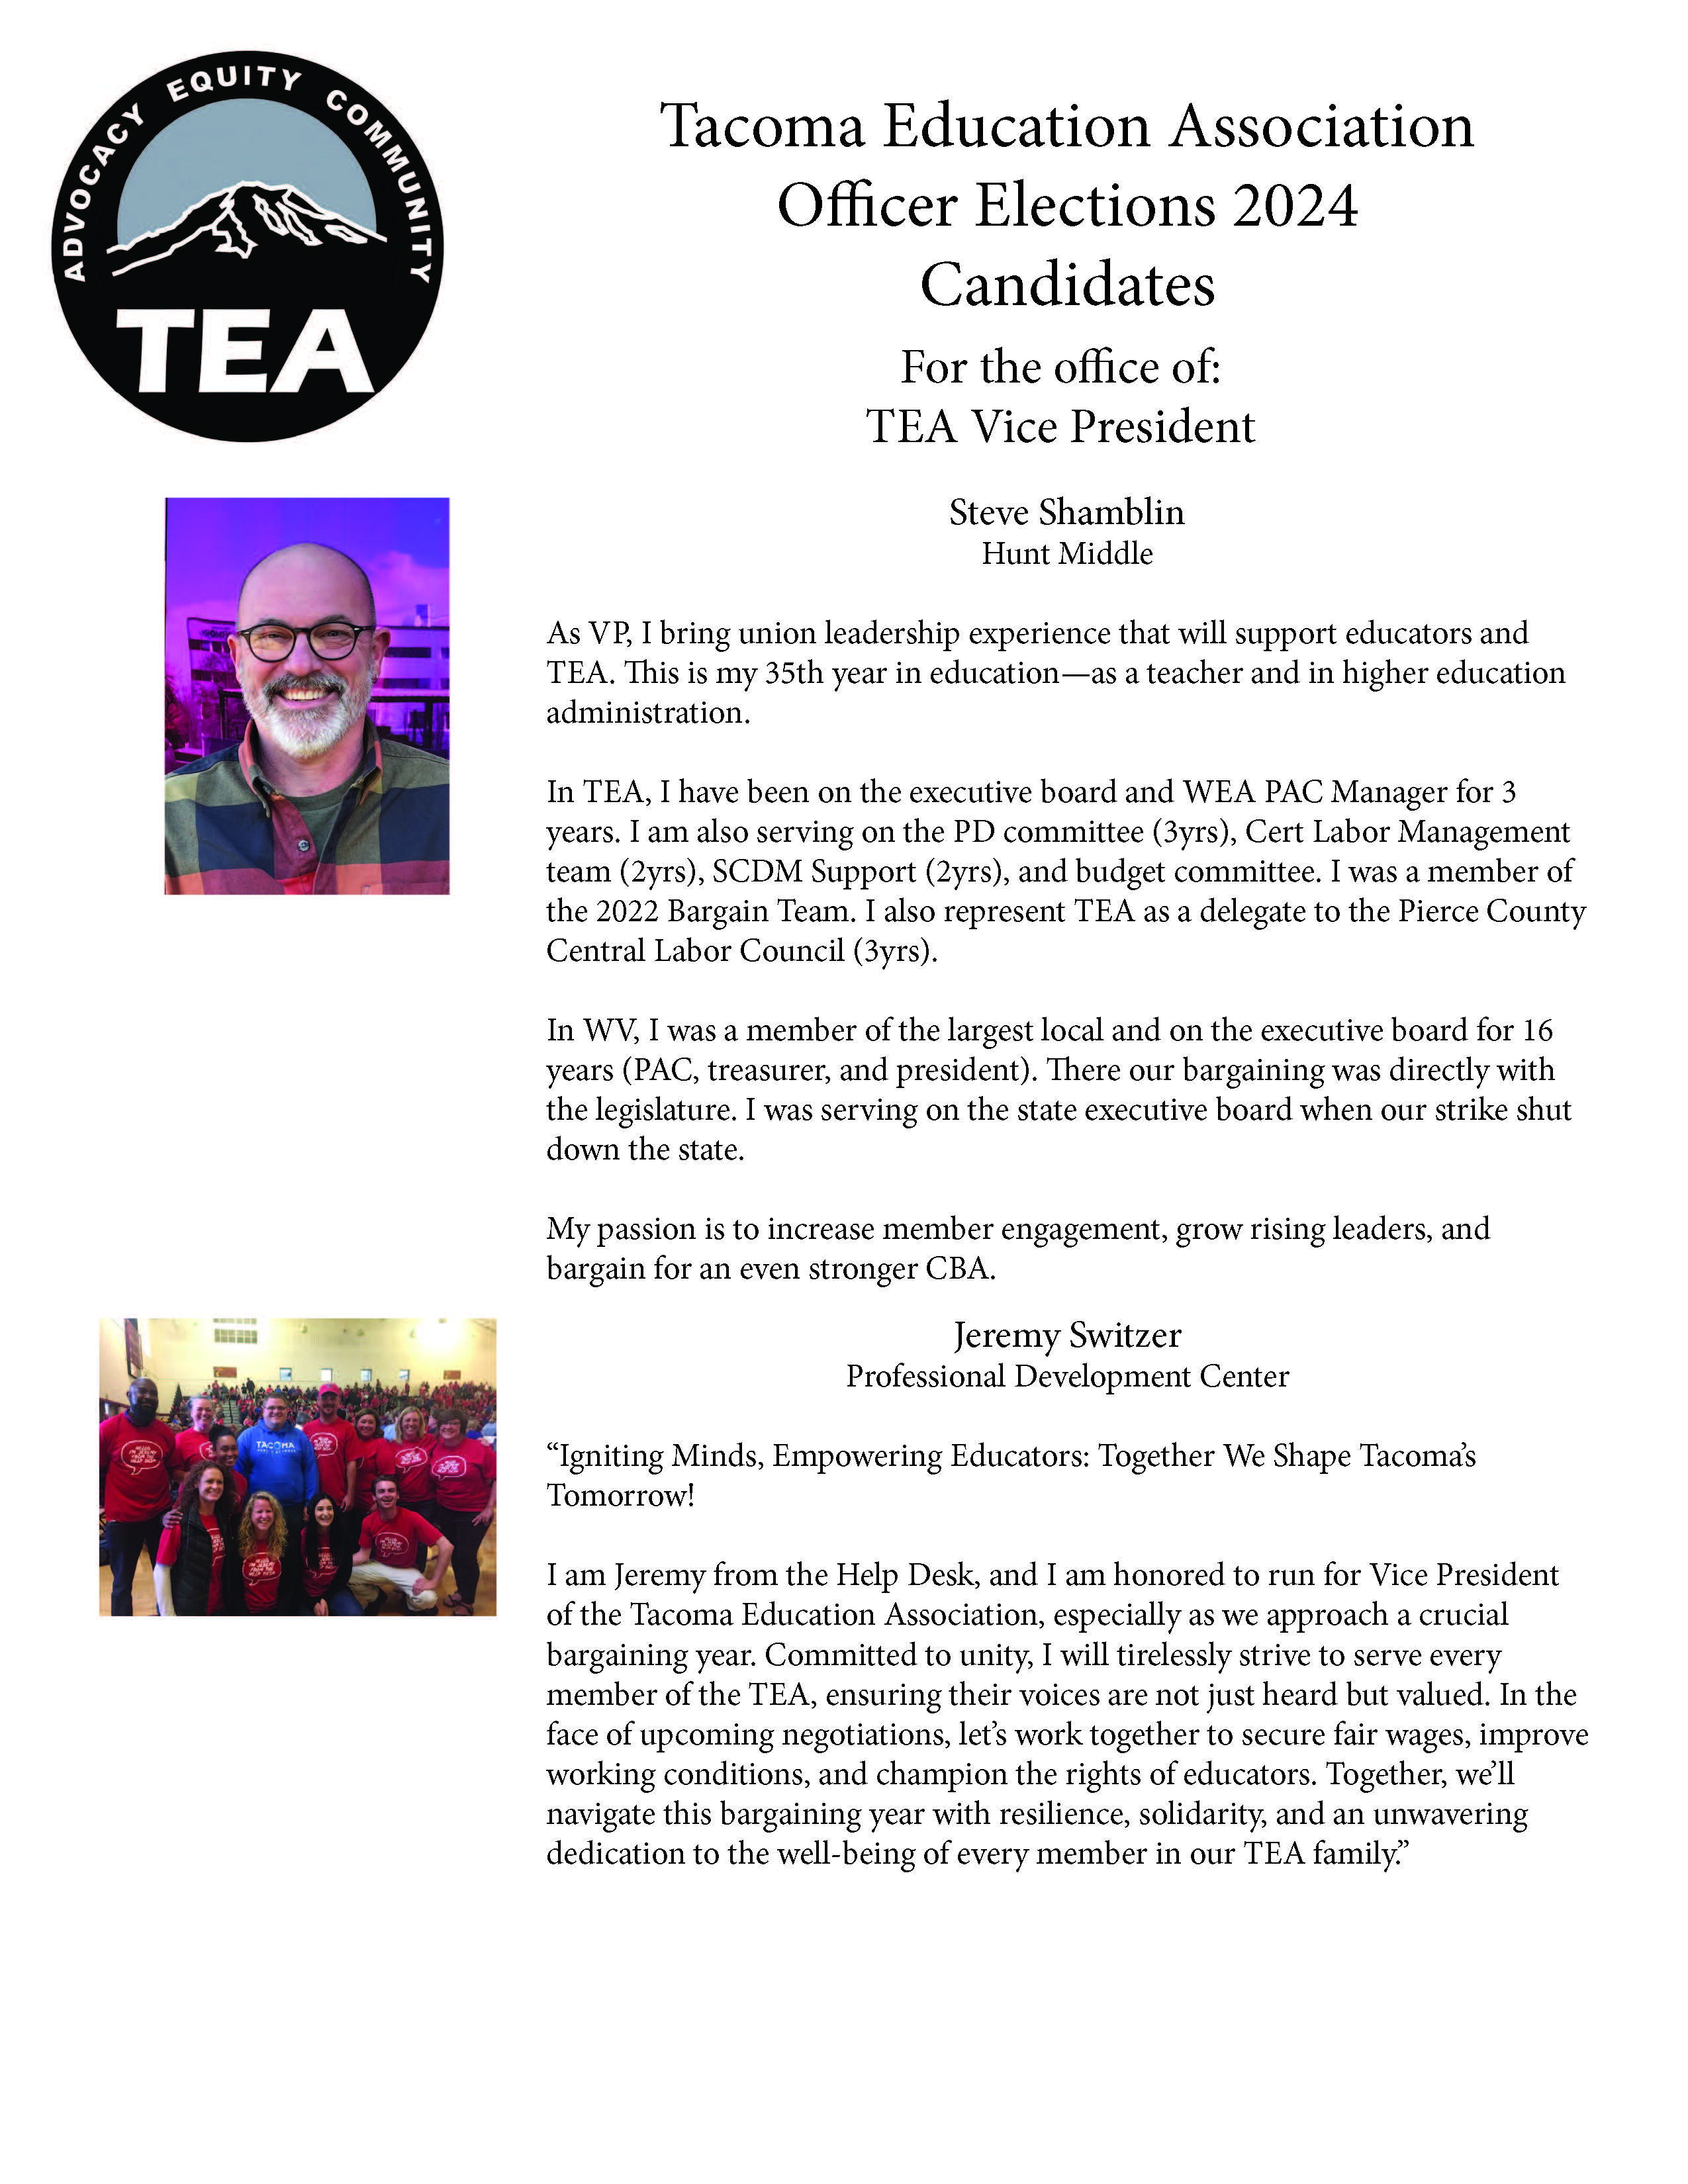 Iofficer elections 2024 candidate statements 6_Page_3